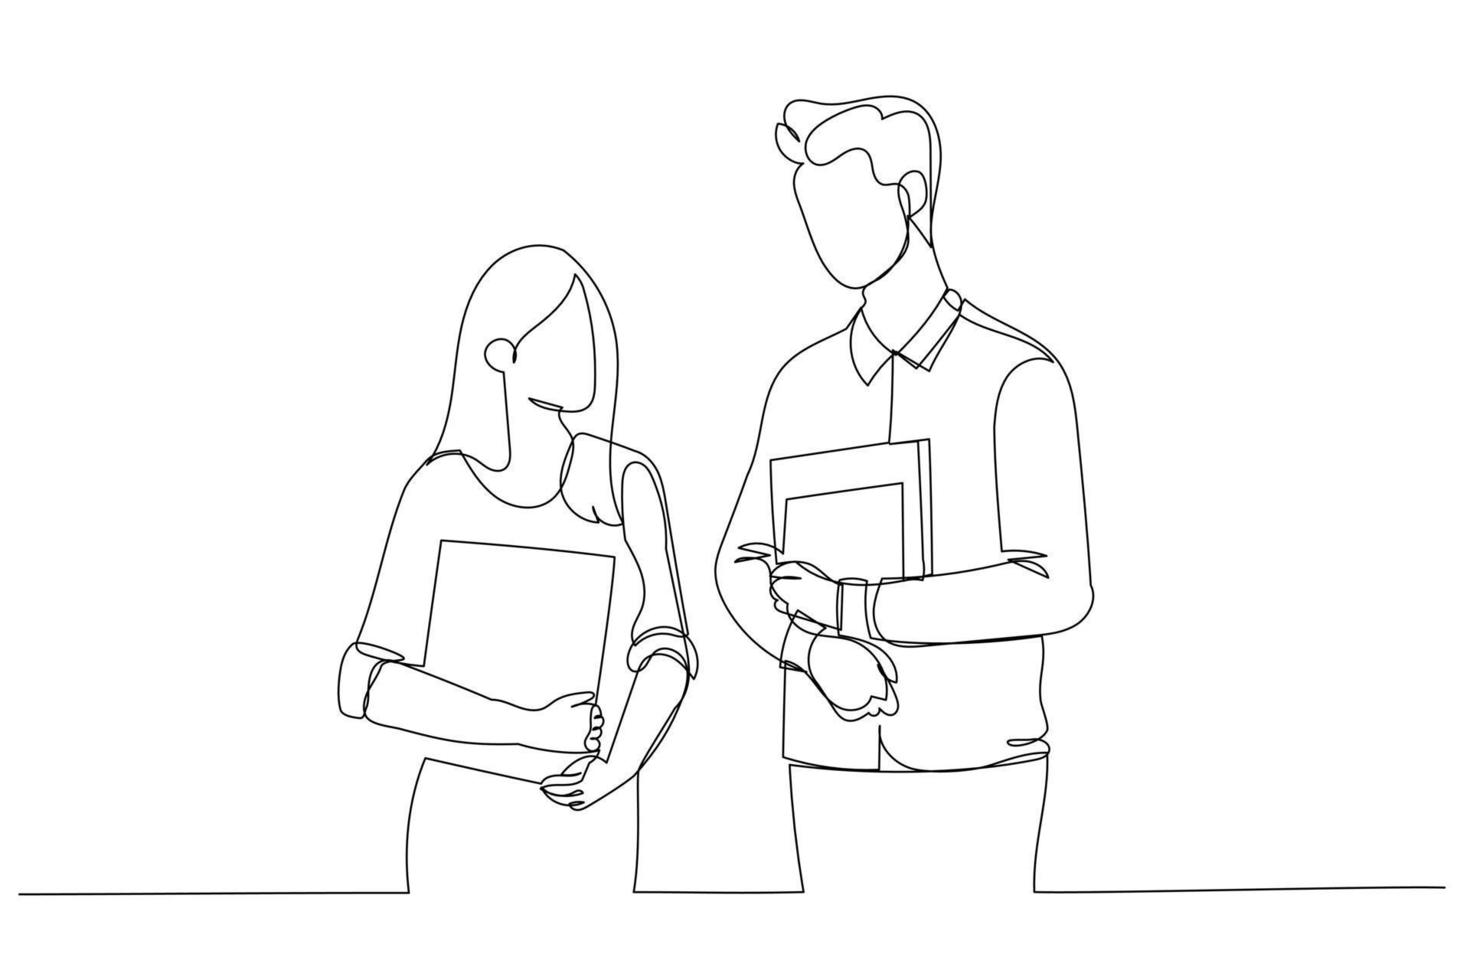 Drawing of two students in love communicate during break holding learning materials. Continuous line art vector